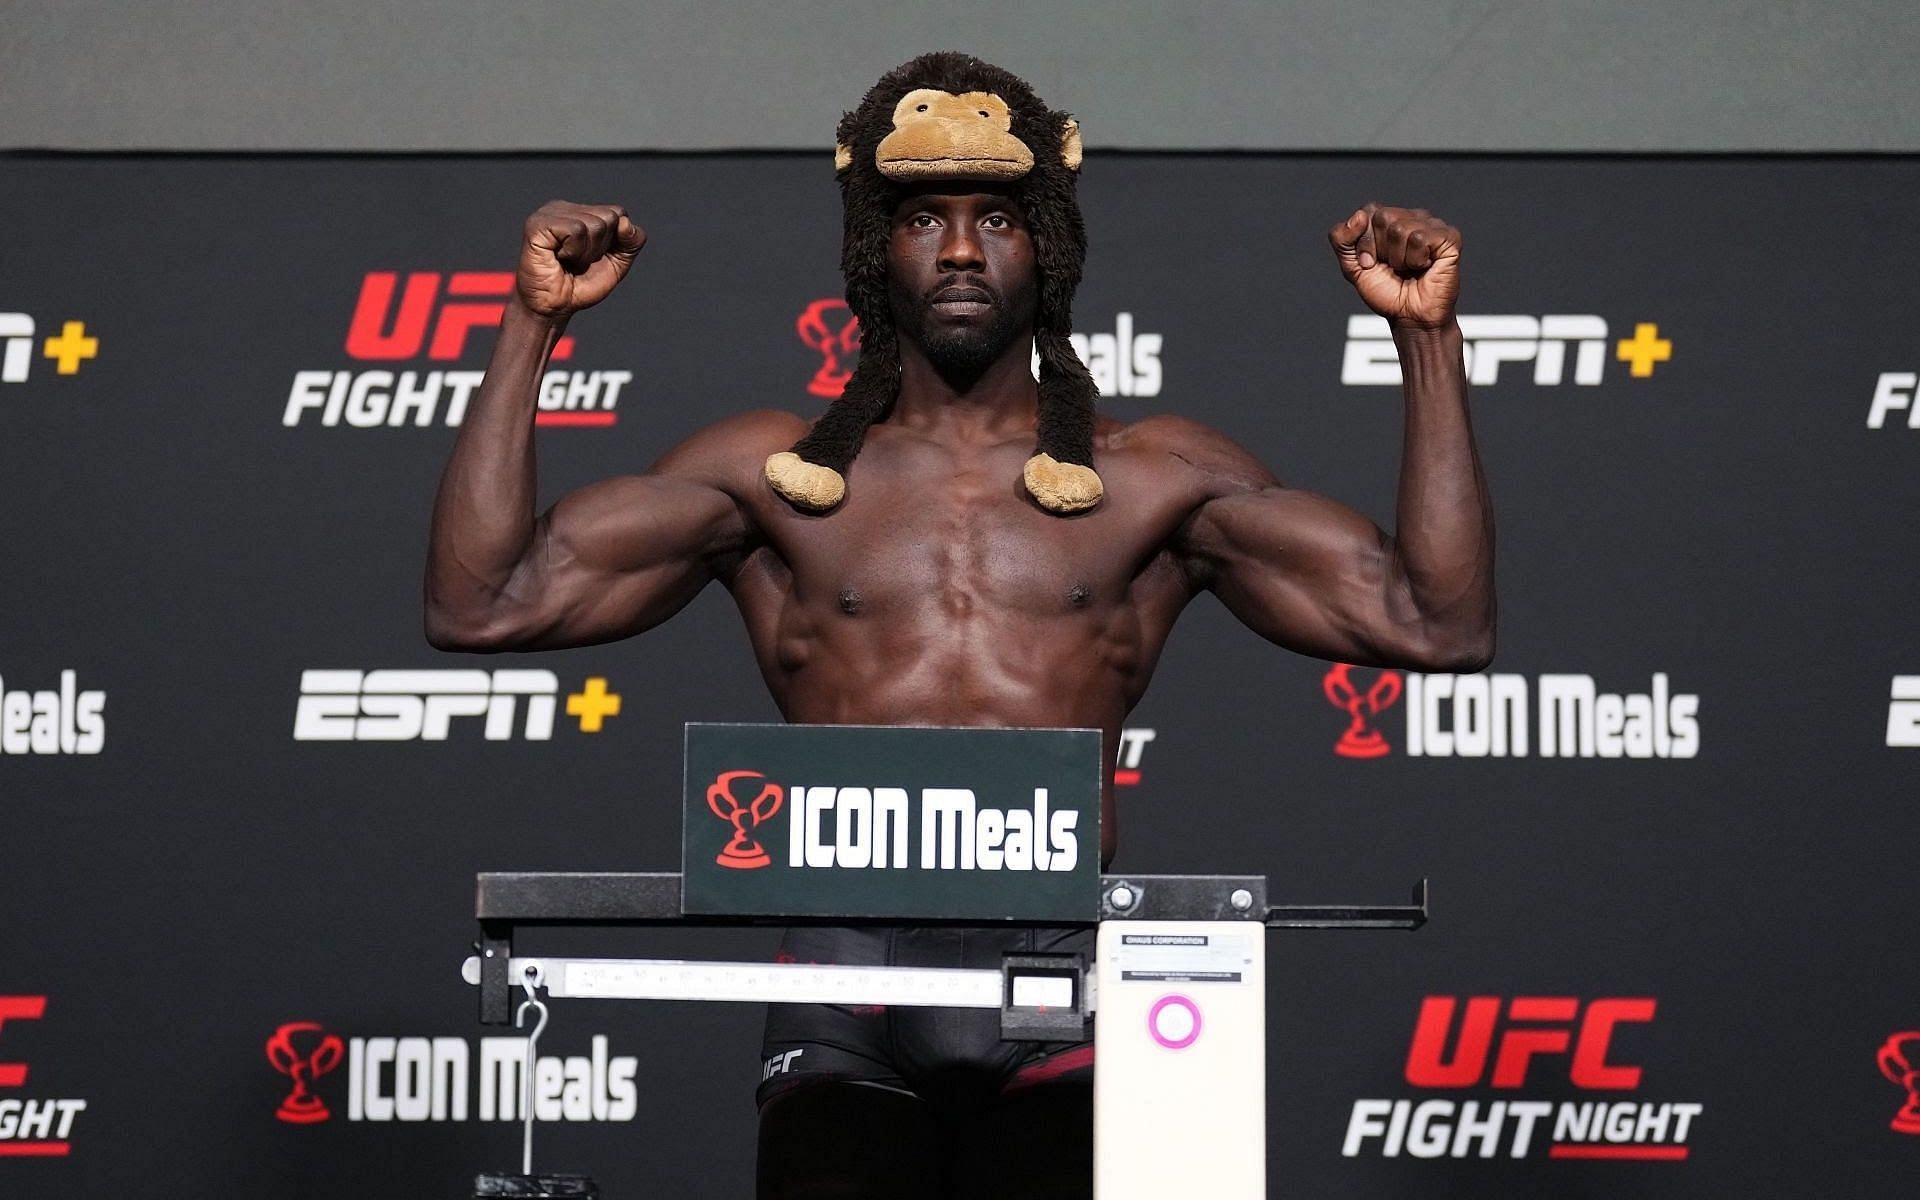 Jared Cannonier came out on top in last nights headline fight